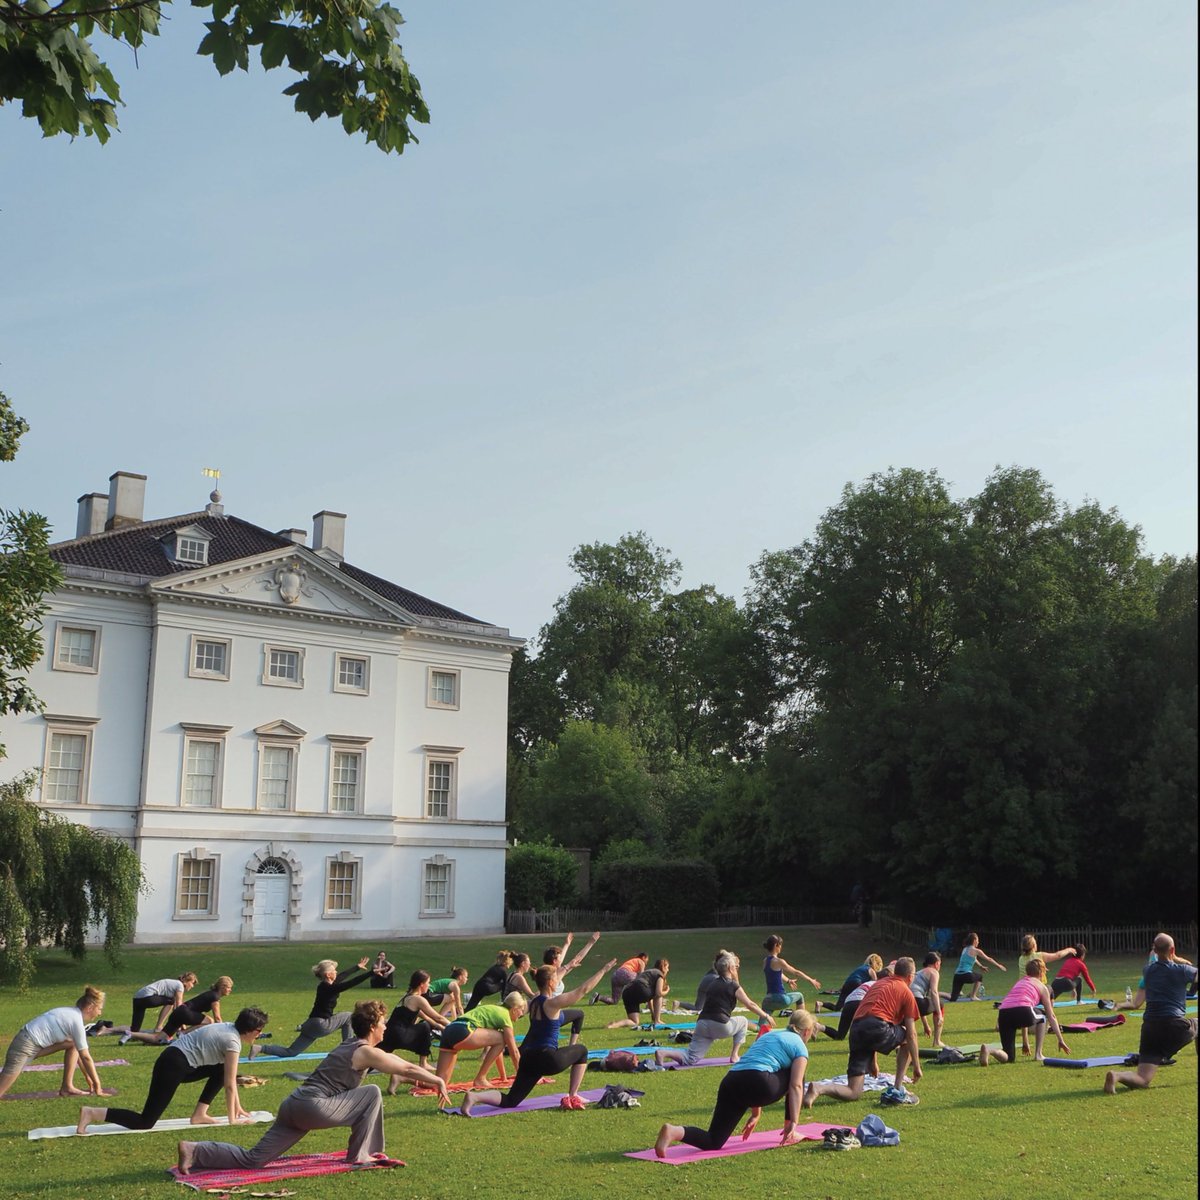 Unsure of what to do this weekend? We have Community Yoga in the Park! Starts at 8am on the Oval Lawn! As always, Marble Hill is FREE and OPEN on the weekend! 10am-5pm (last entry at 4:30pm)! We also have our Agria Doggy Day! For More: english-heritage.org.uk/.../marble-hil…